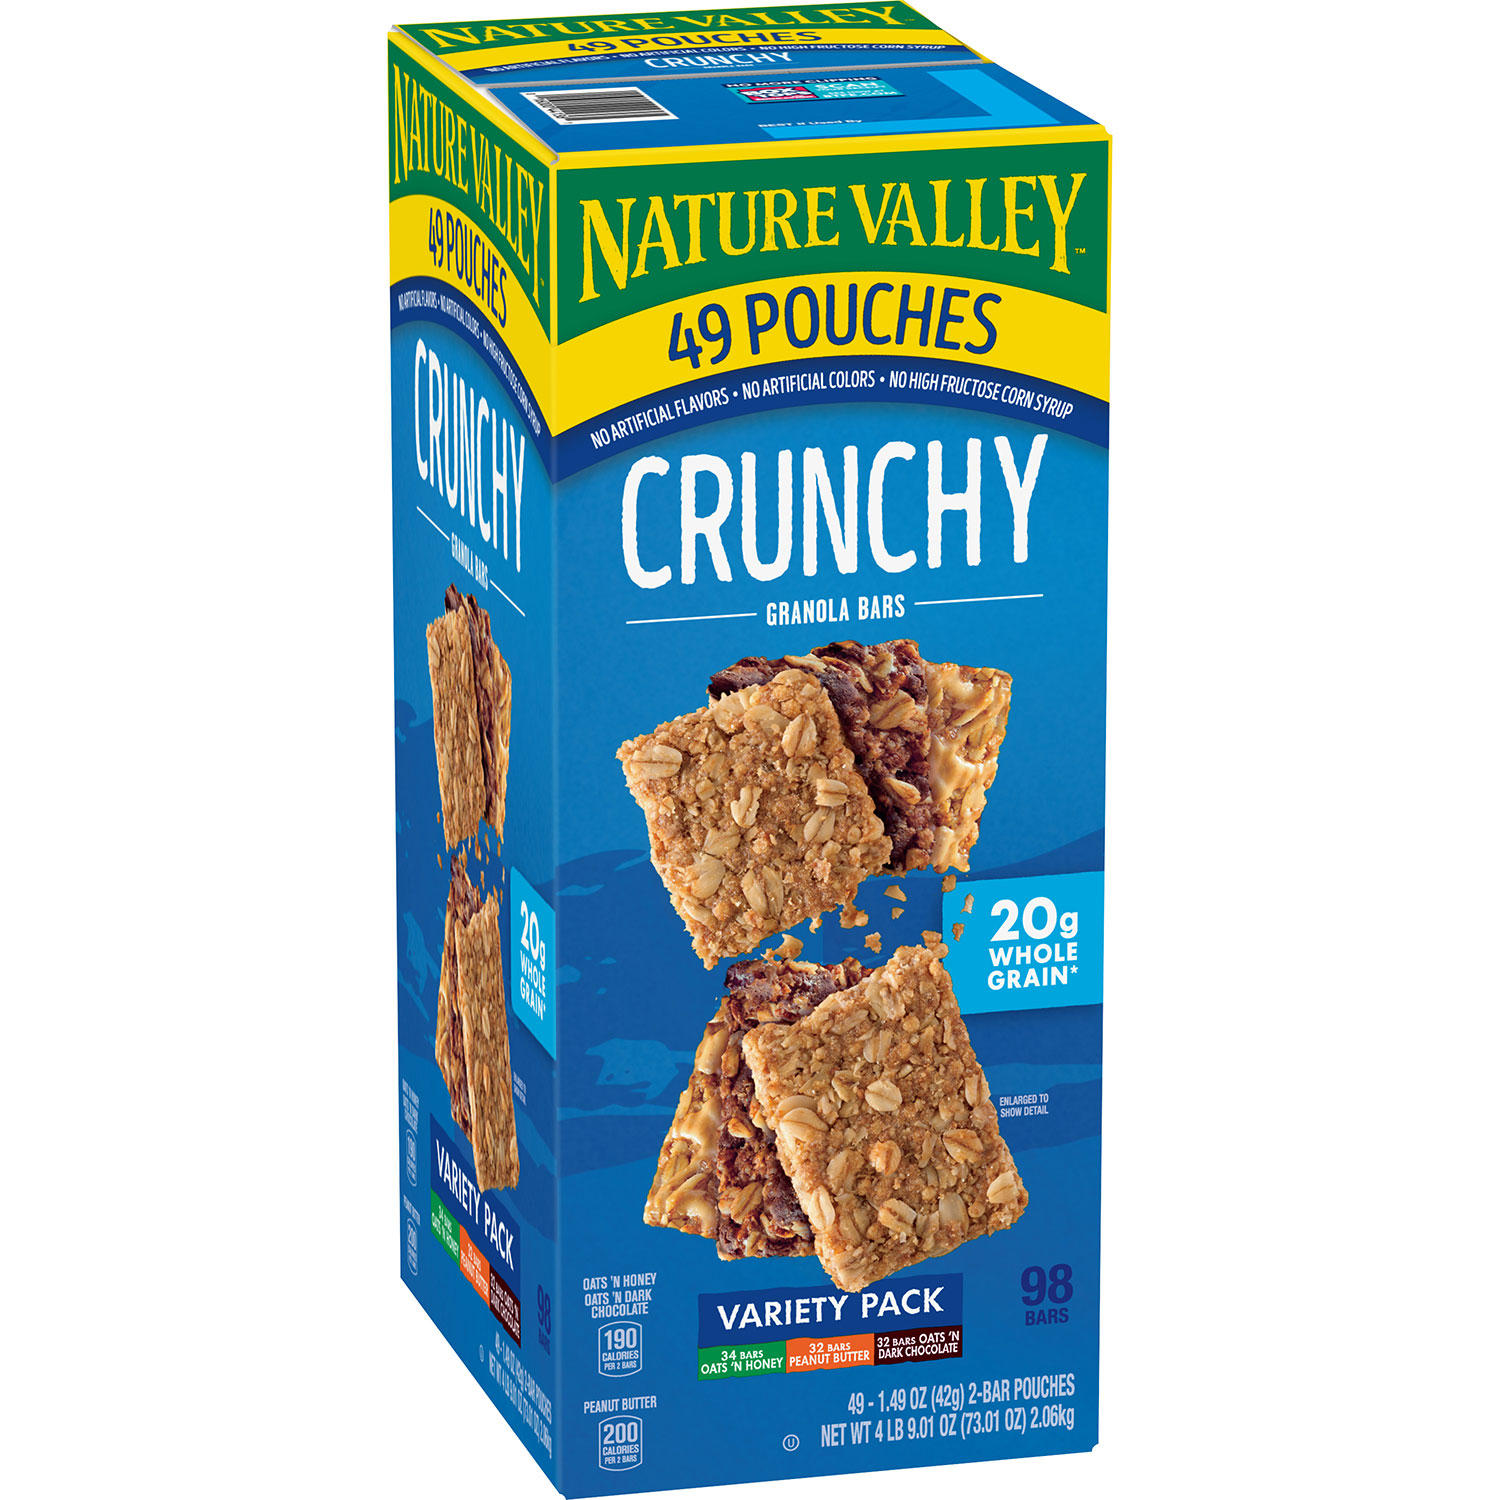 UPC 016000441361 product image for Nature Valley Crunchy Granola Bars Variety Pack, 49 ct. | upcitemdb.com